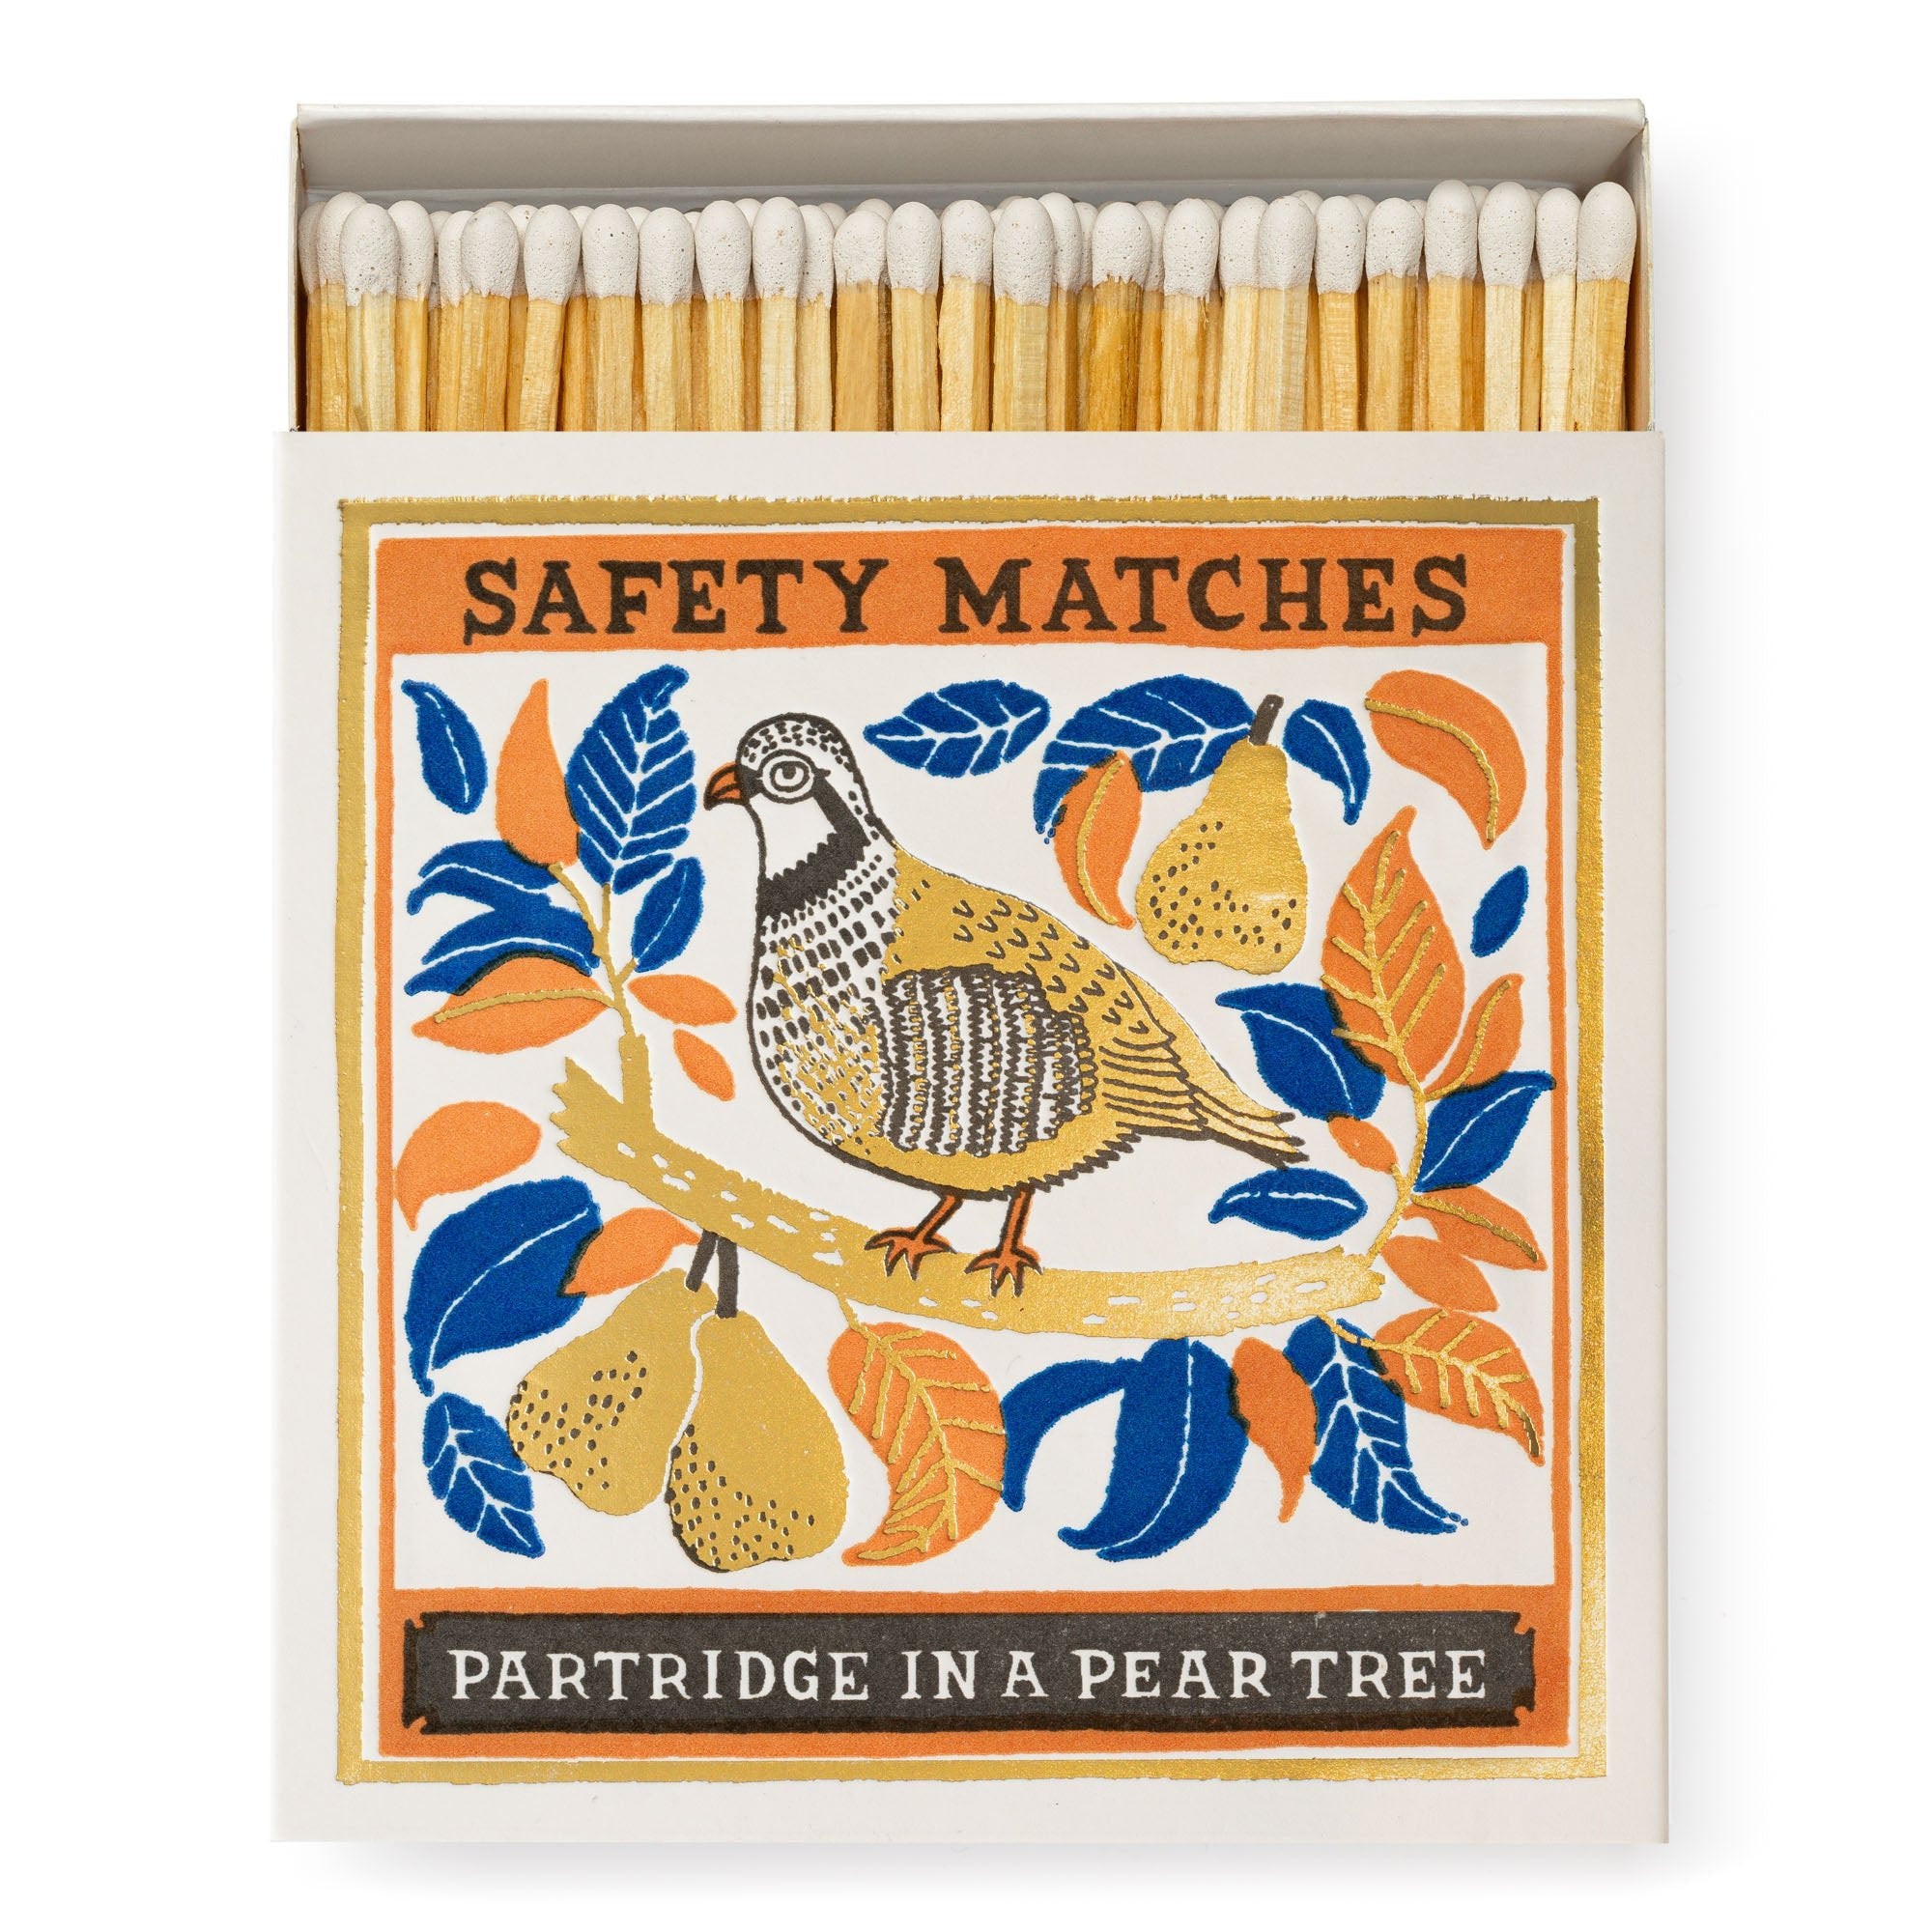 Luxury Matches - Partridge In A Pear Tree - Life of Riley